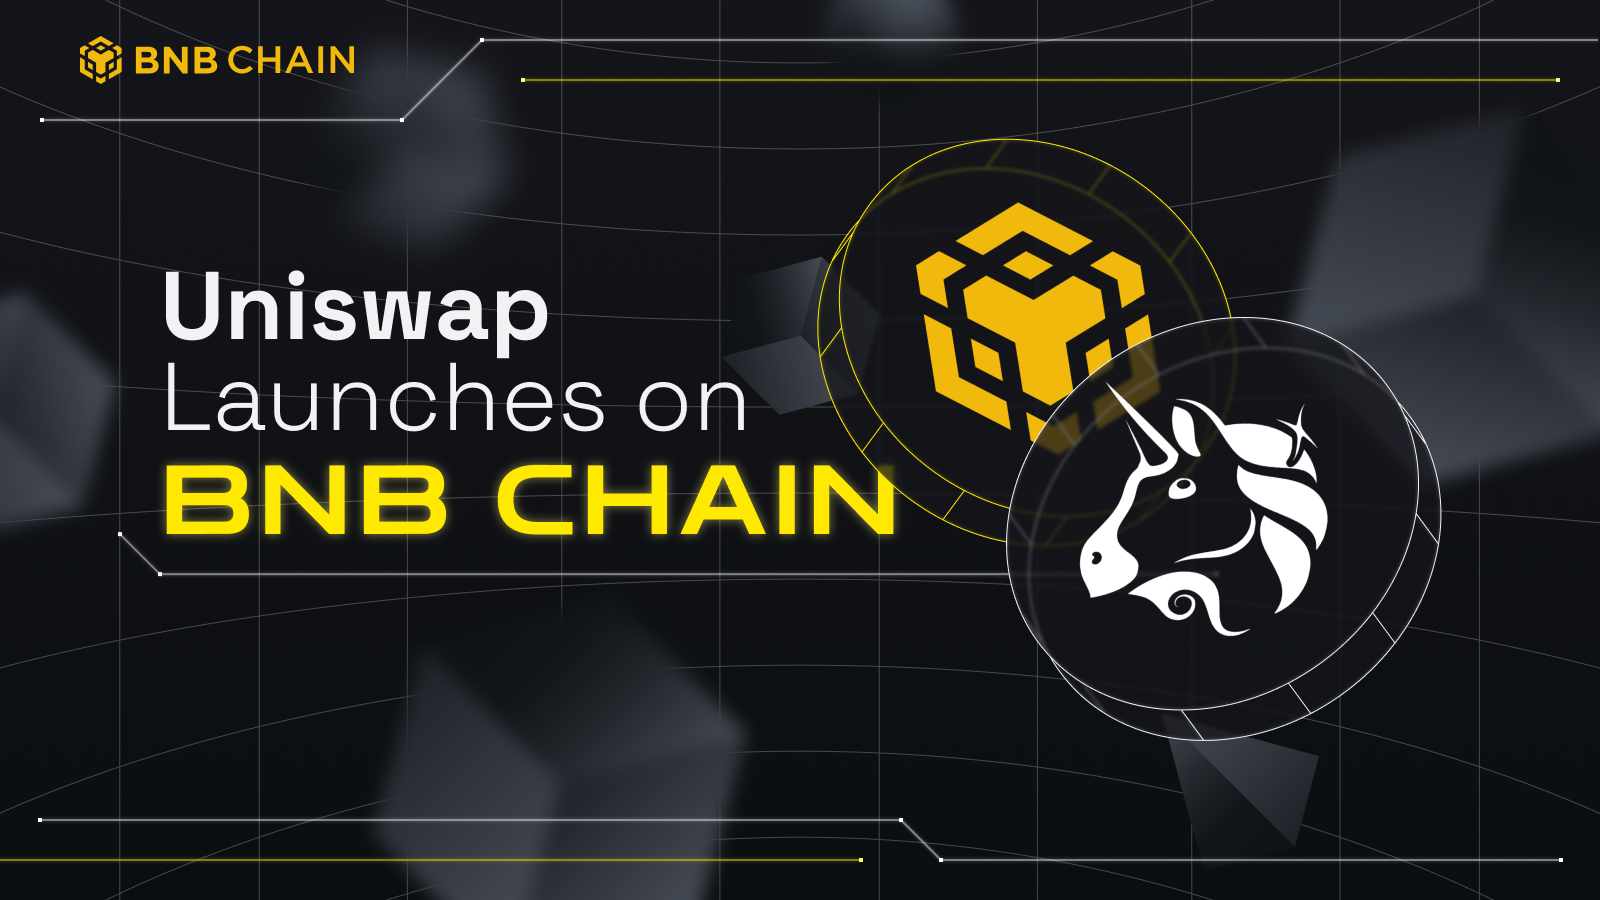 Uniswap Is Officially Live on BNB Chain